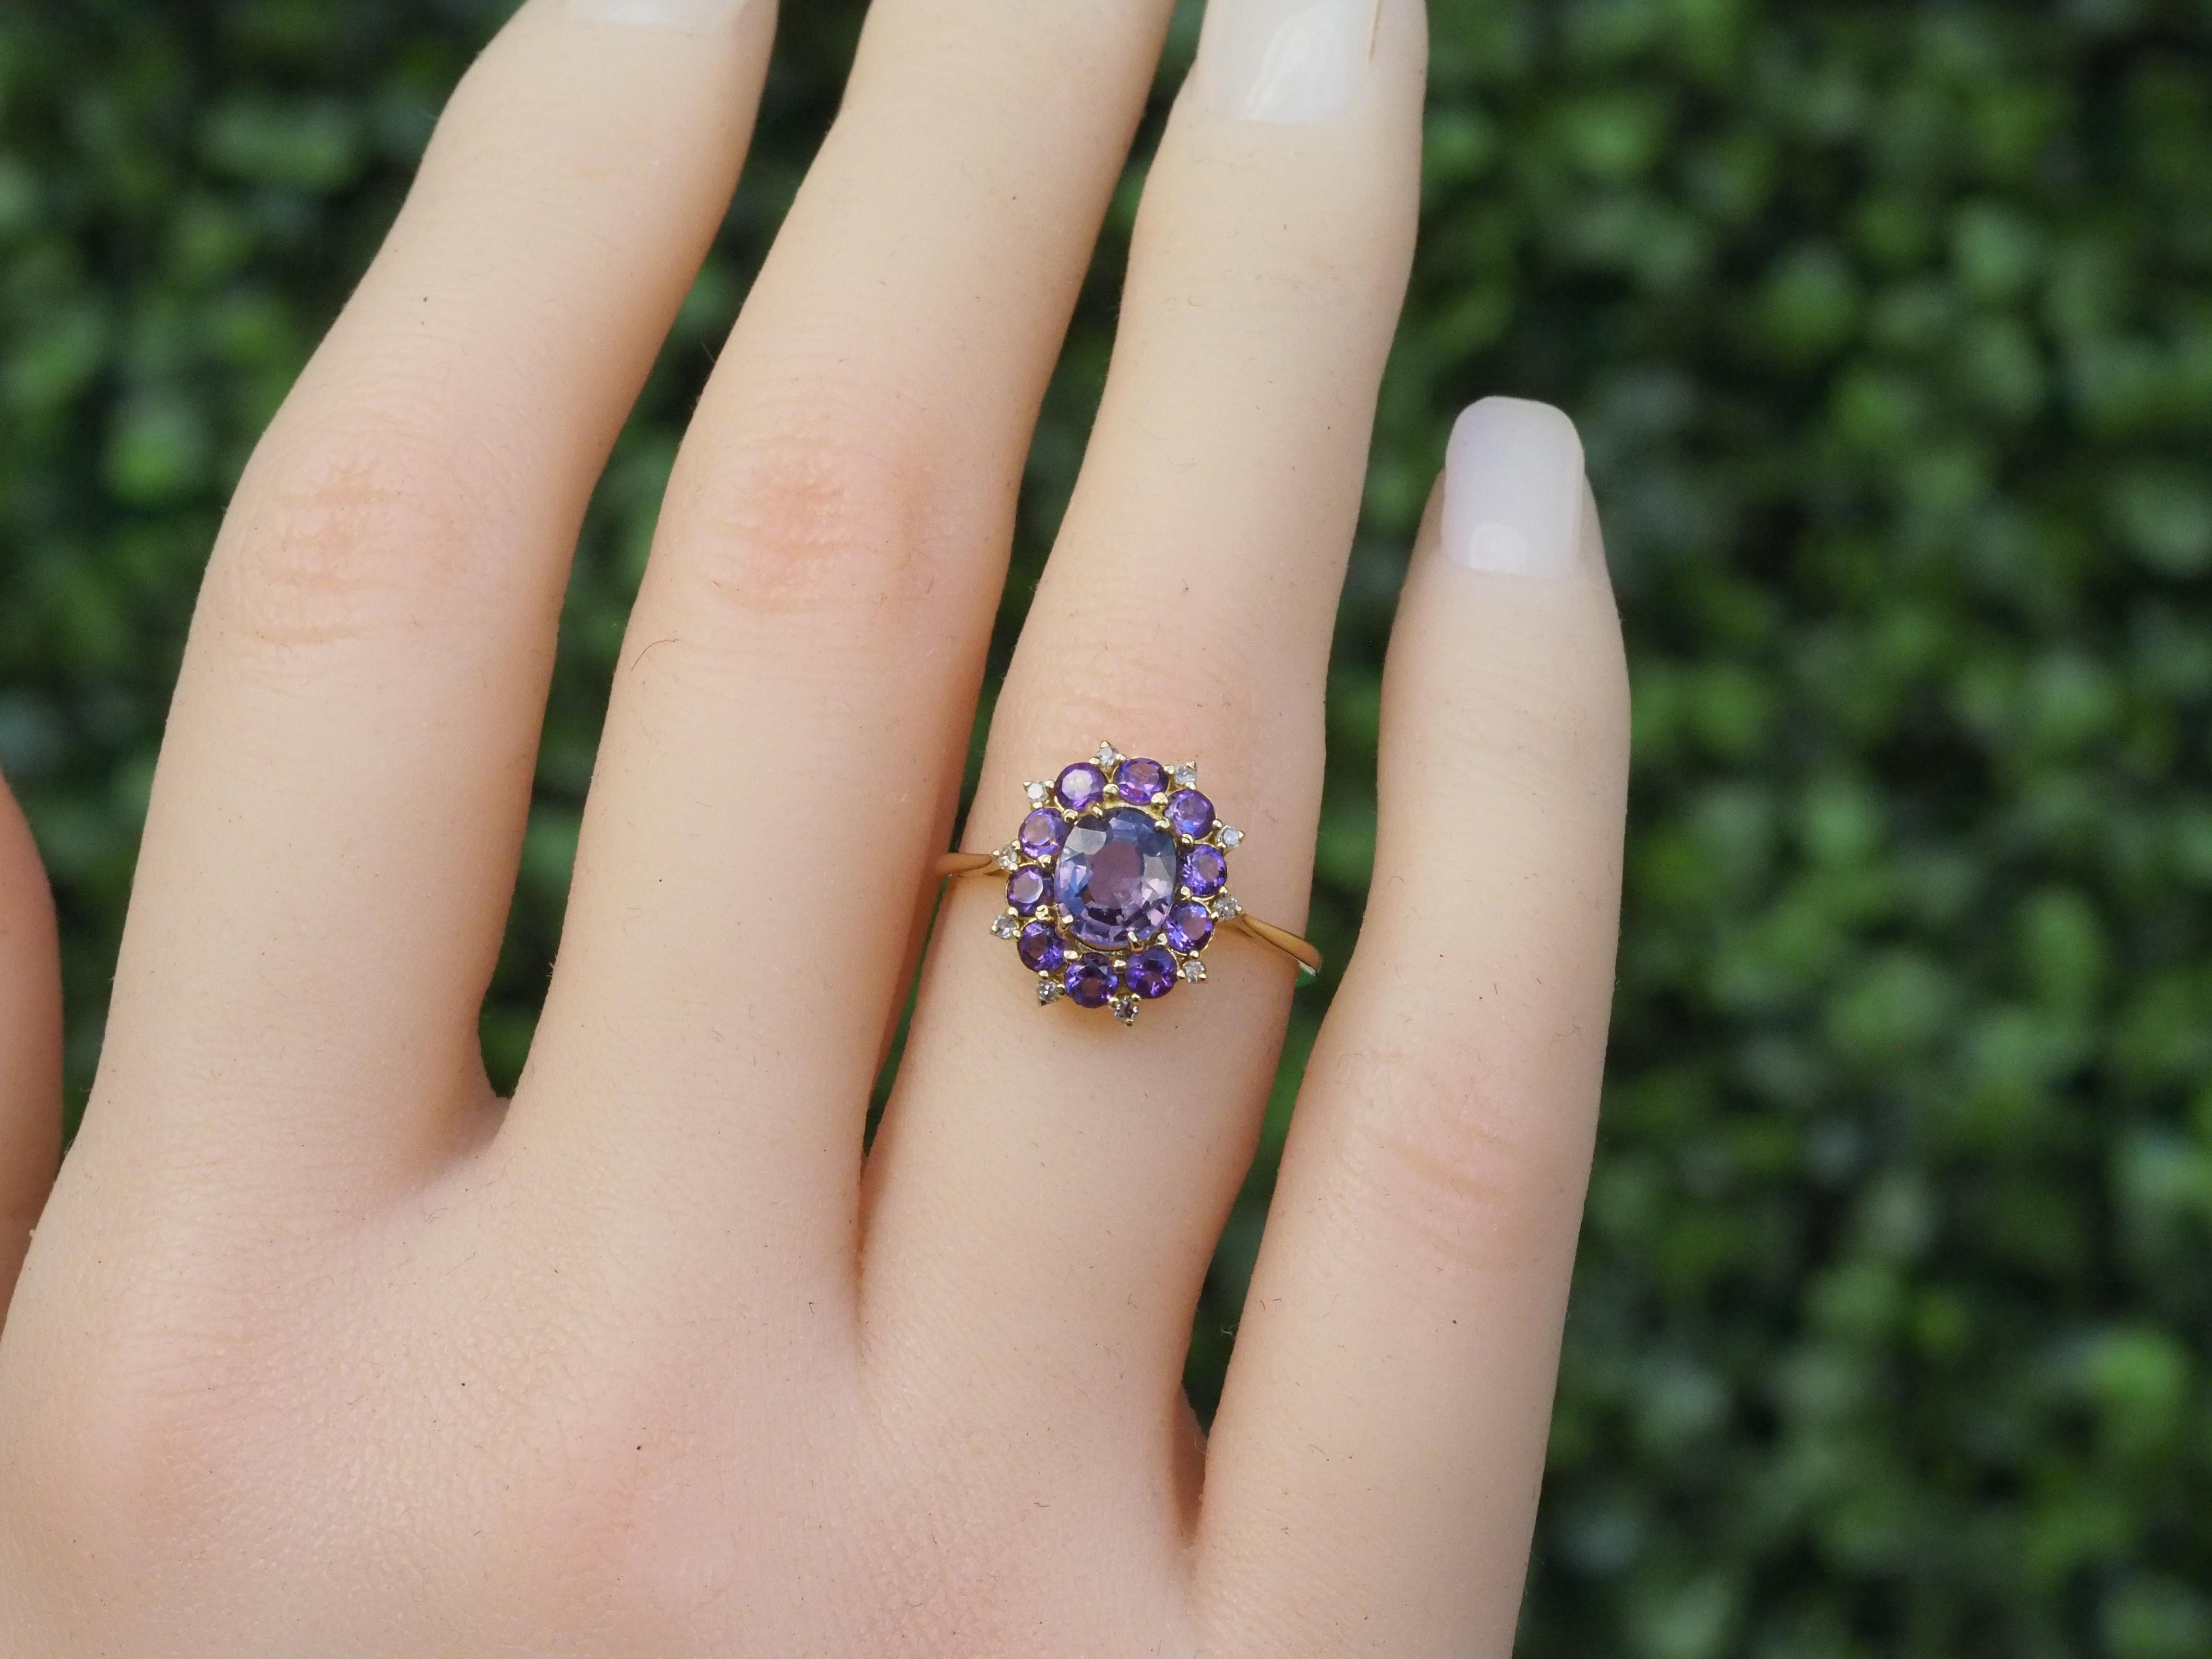 Lavender Spinel Gold Ring, 14k Gold Ring with Spinel, Amethyst and Diamonds 2